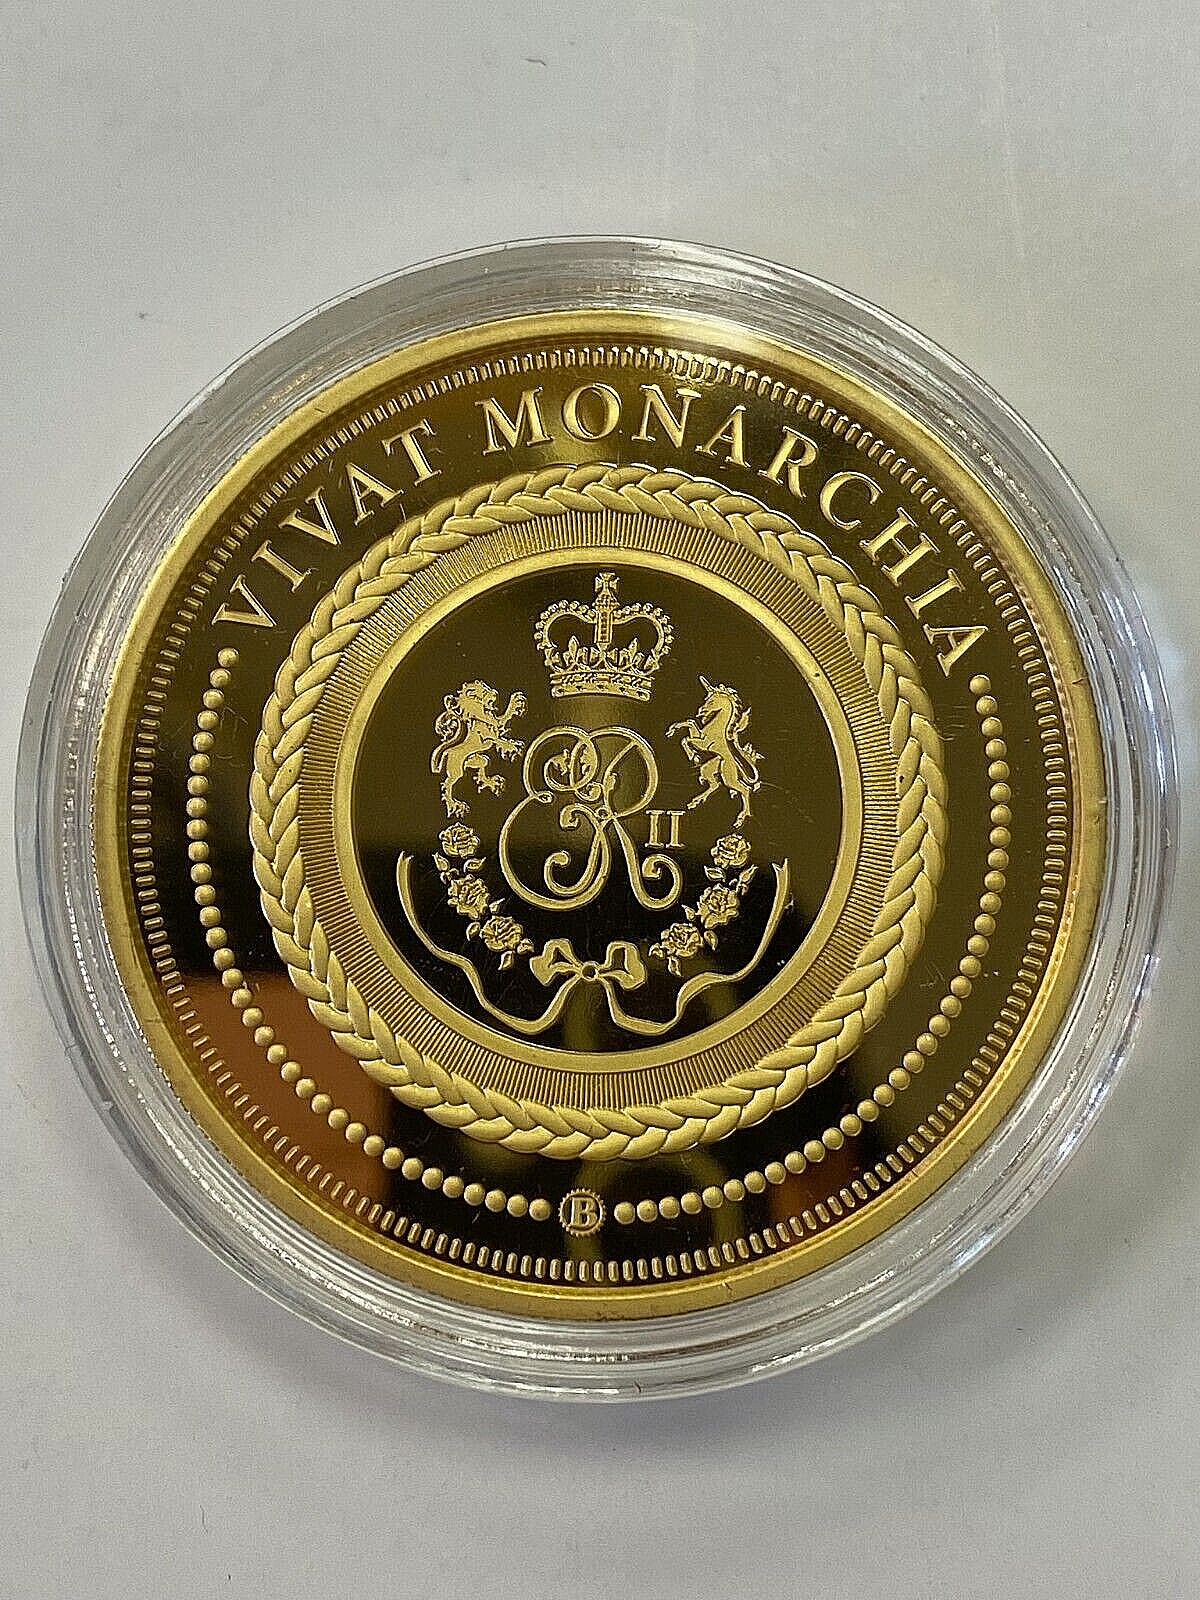 QUEEN ELIZABETH II PROOF COIN COLLECTION  24K GOLD PLATED HER MAJESTY 95th B-DAY Без бренда - фотография #2